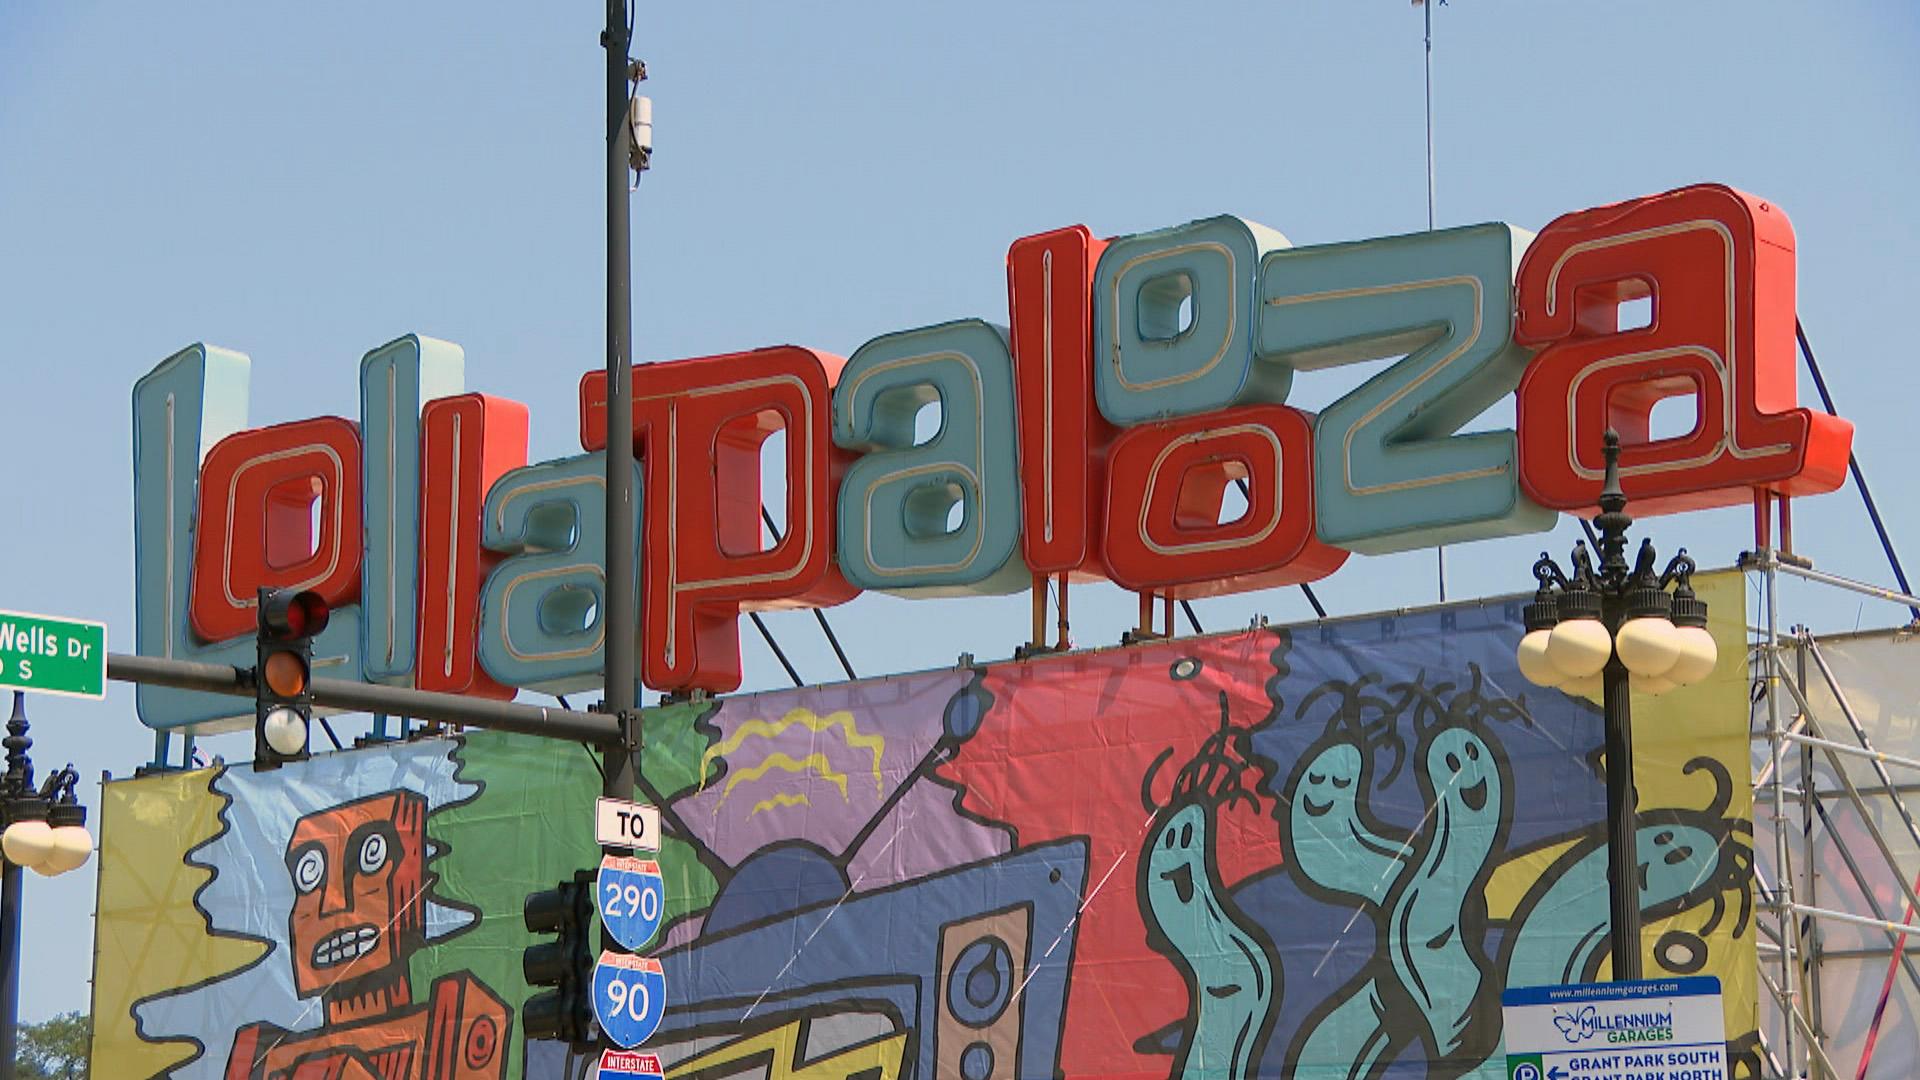 Lollapalooza will return to Chicago at full capacity from July 29 to Aug. 1, 2021. (WTTW News)